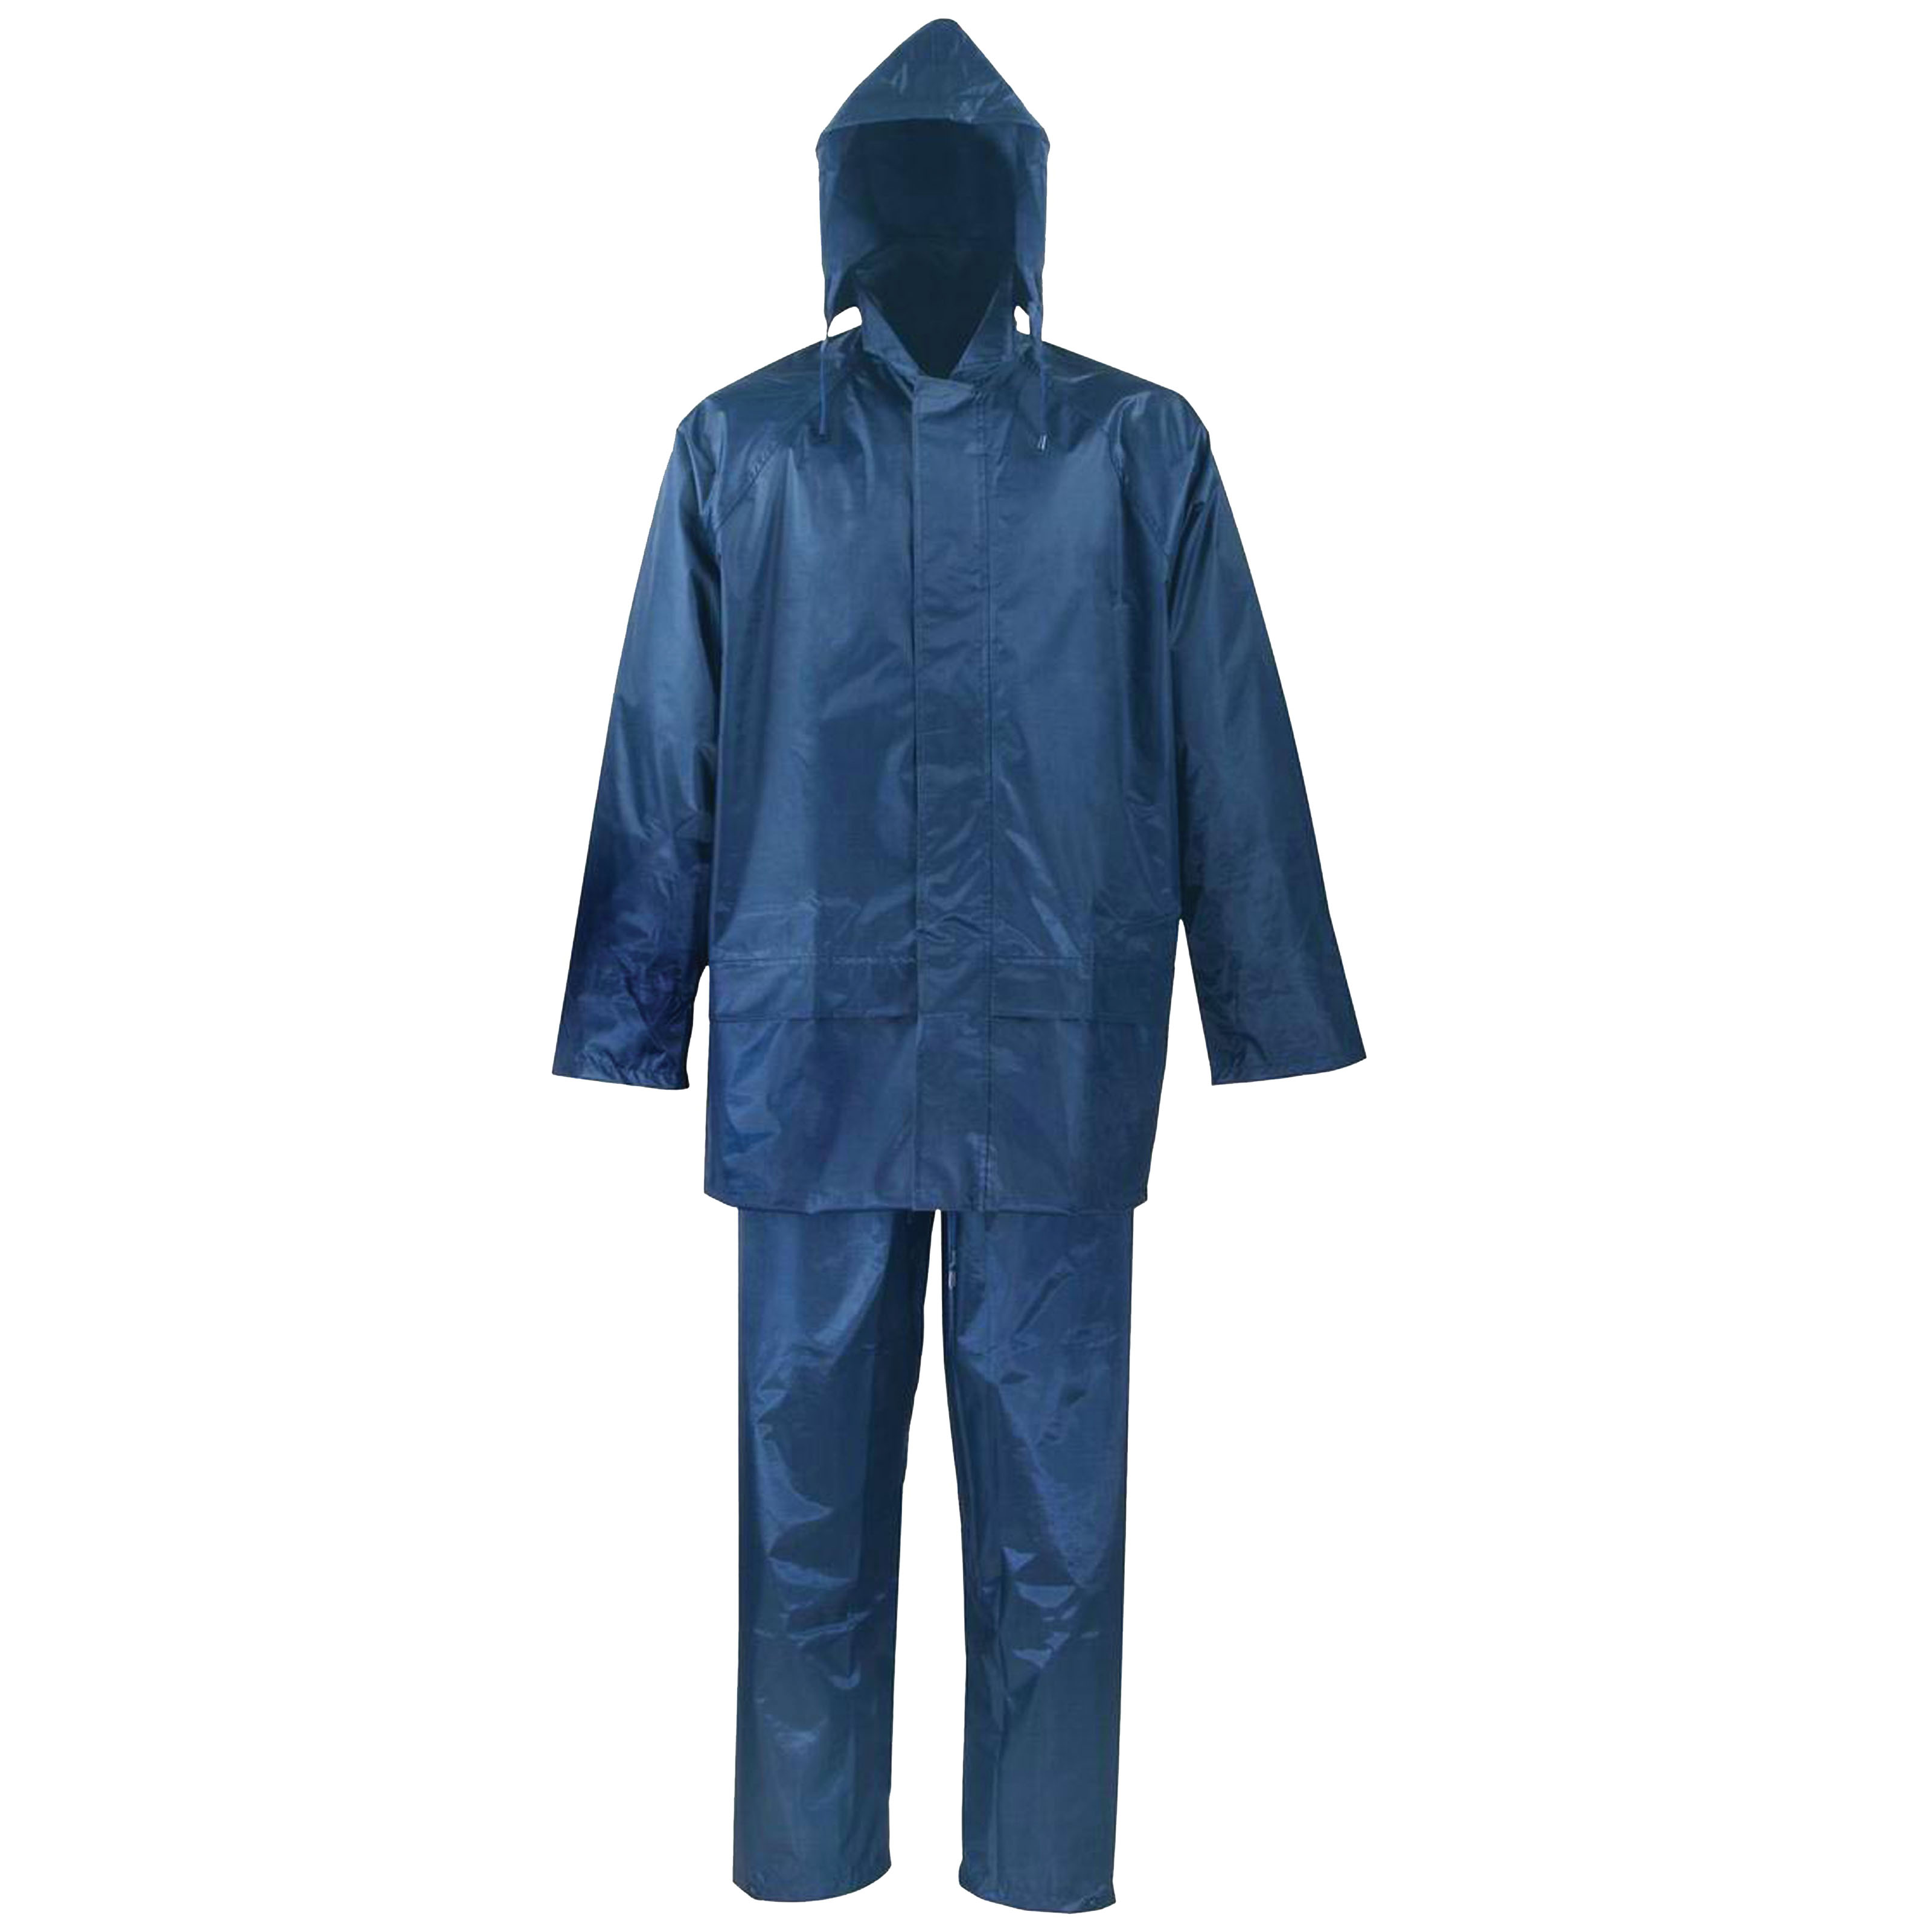 SPU045-XXXL Rain Suit, 3XL, 32-1/2 in Inseam, Polyester, Blue, Drawstring Pull-Out Hood Collar